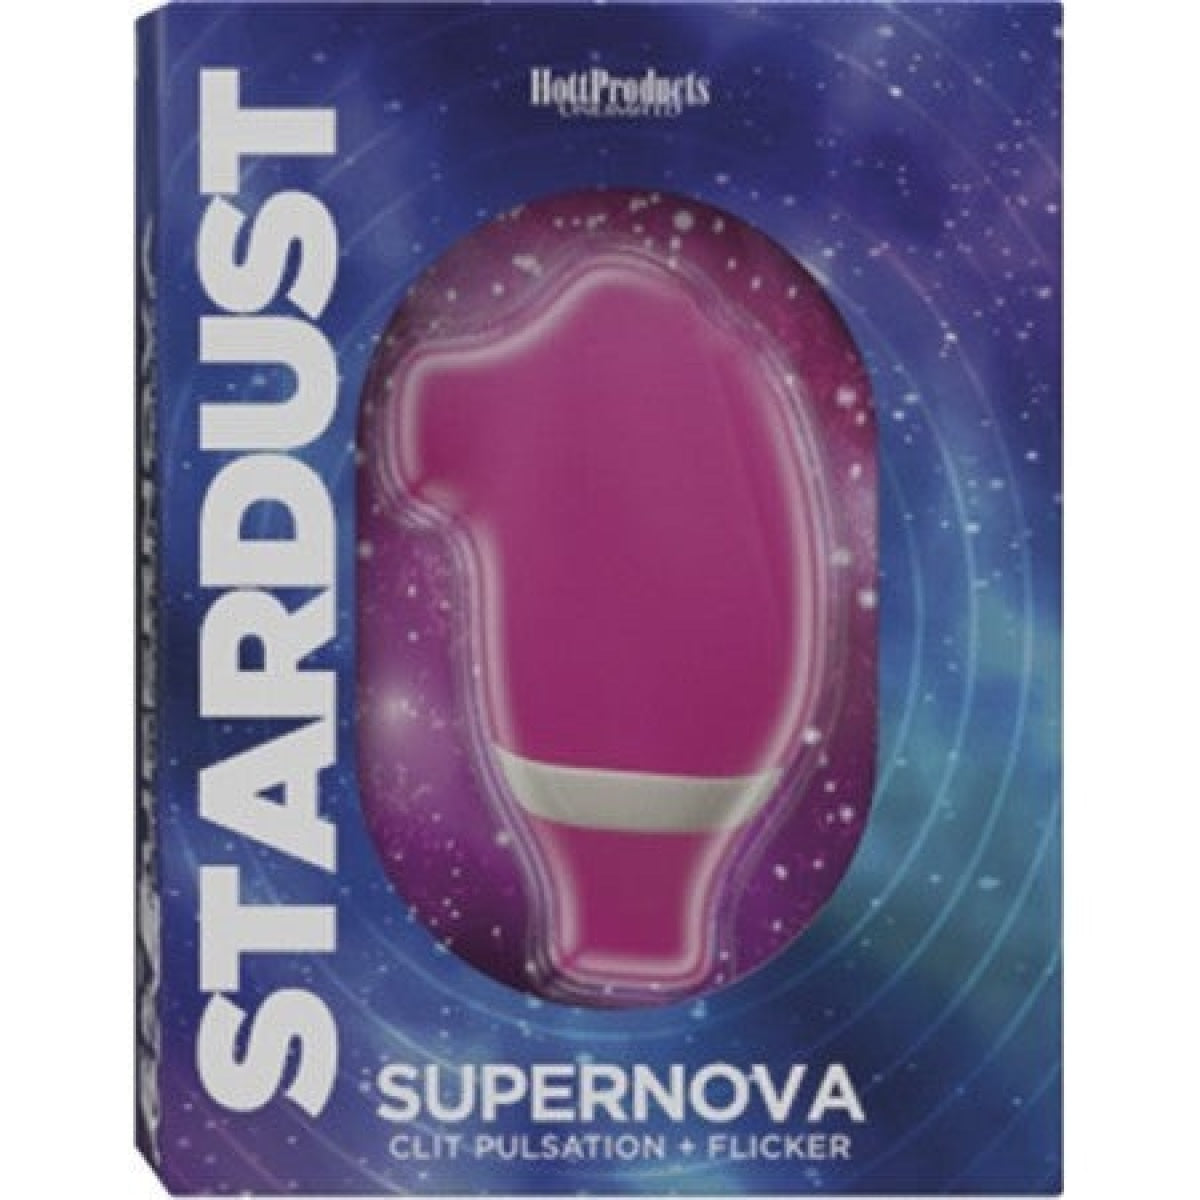 Stardust Supernova Licking Tongue & Suction Intimates Adult Boutique